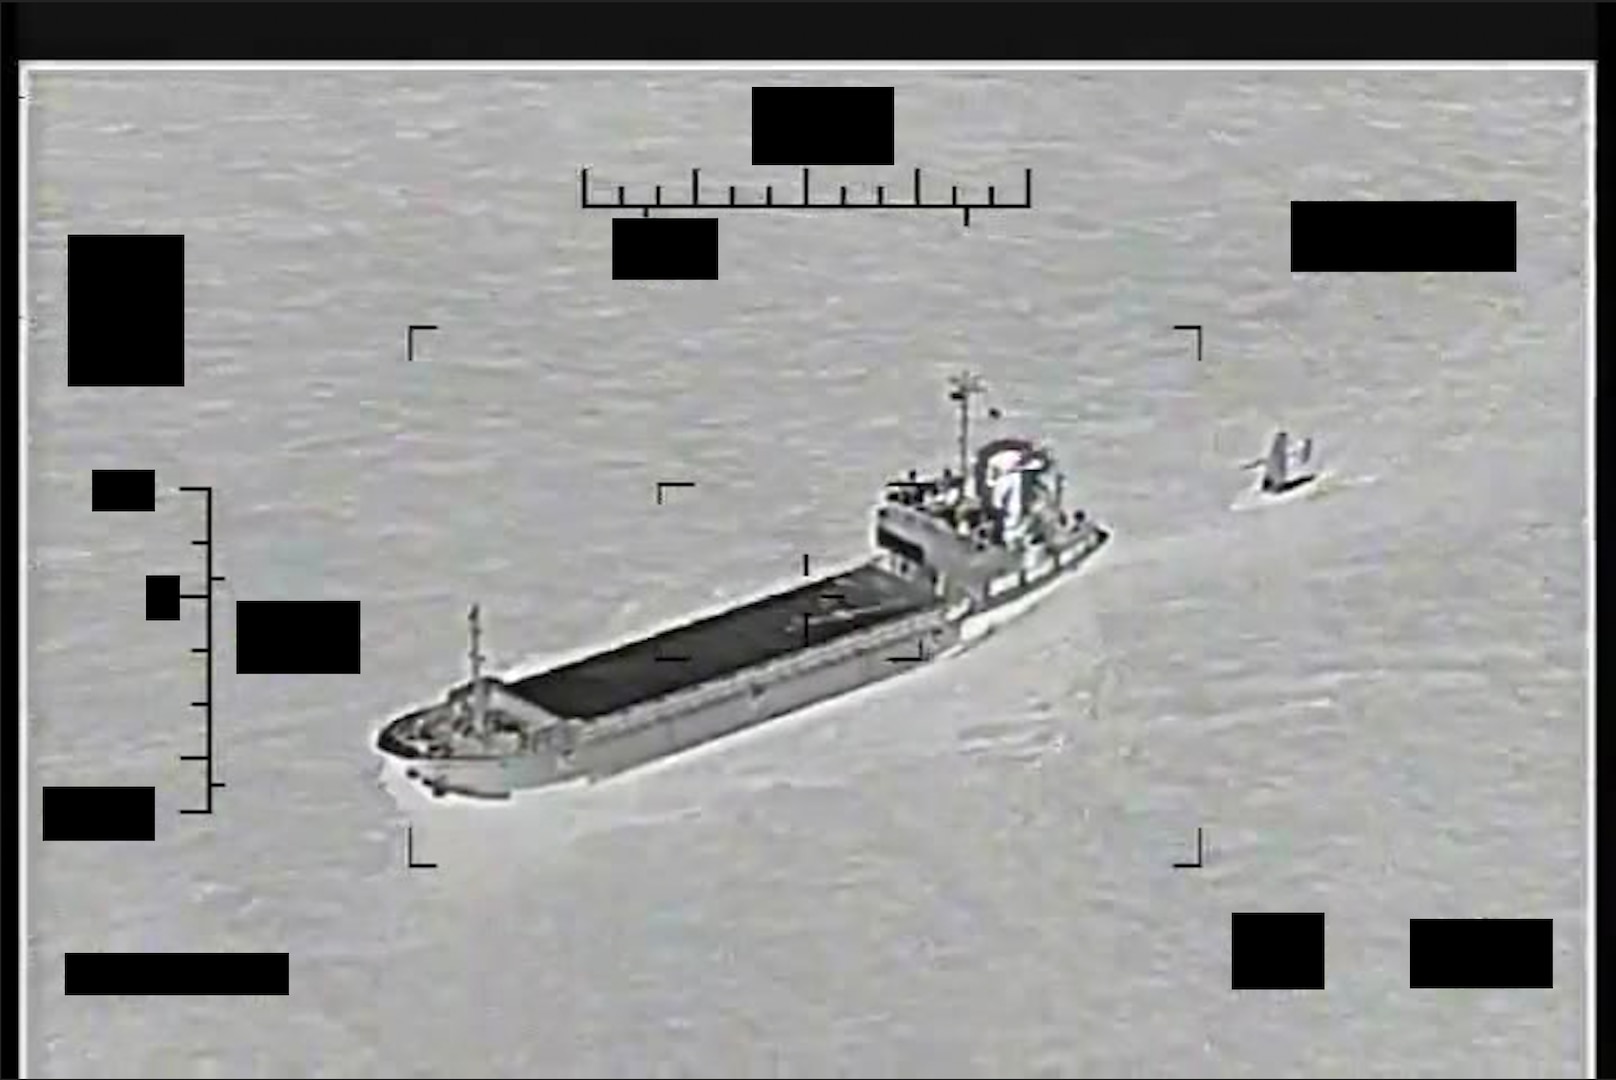 ARABIAN GULF (Aug. 30, 2022) Screenshot of a video showing support ship Shahid Baziar, left, from Iran's Islamic Revolutionary Guard Corps Navy unlawfully towing a Saildrone Explorer unmanned surface vessel in international waters of the Arabian Gulf, Aug. 30.